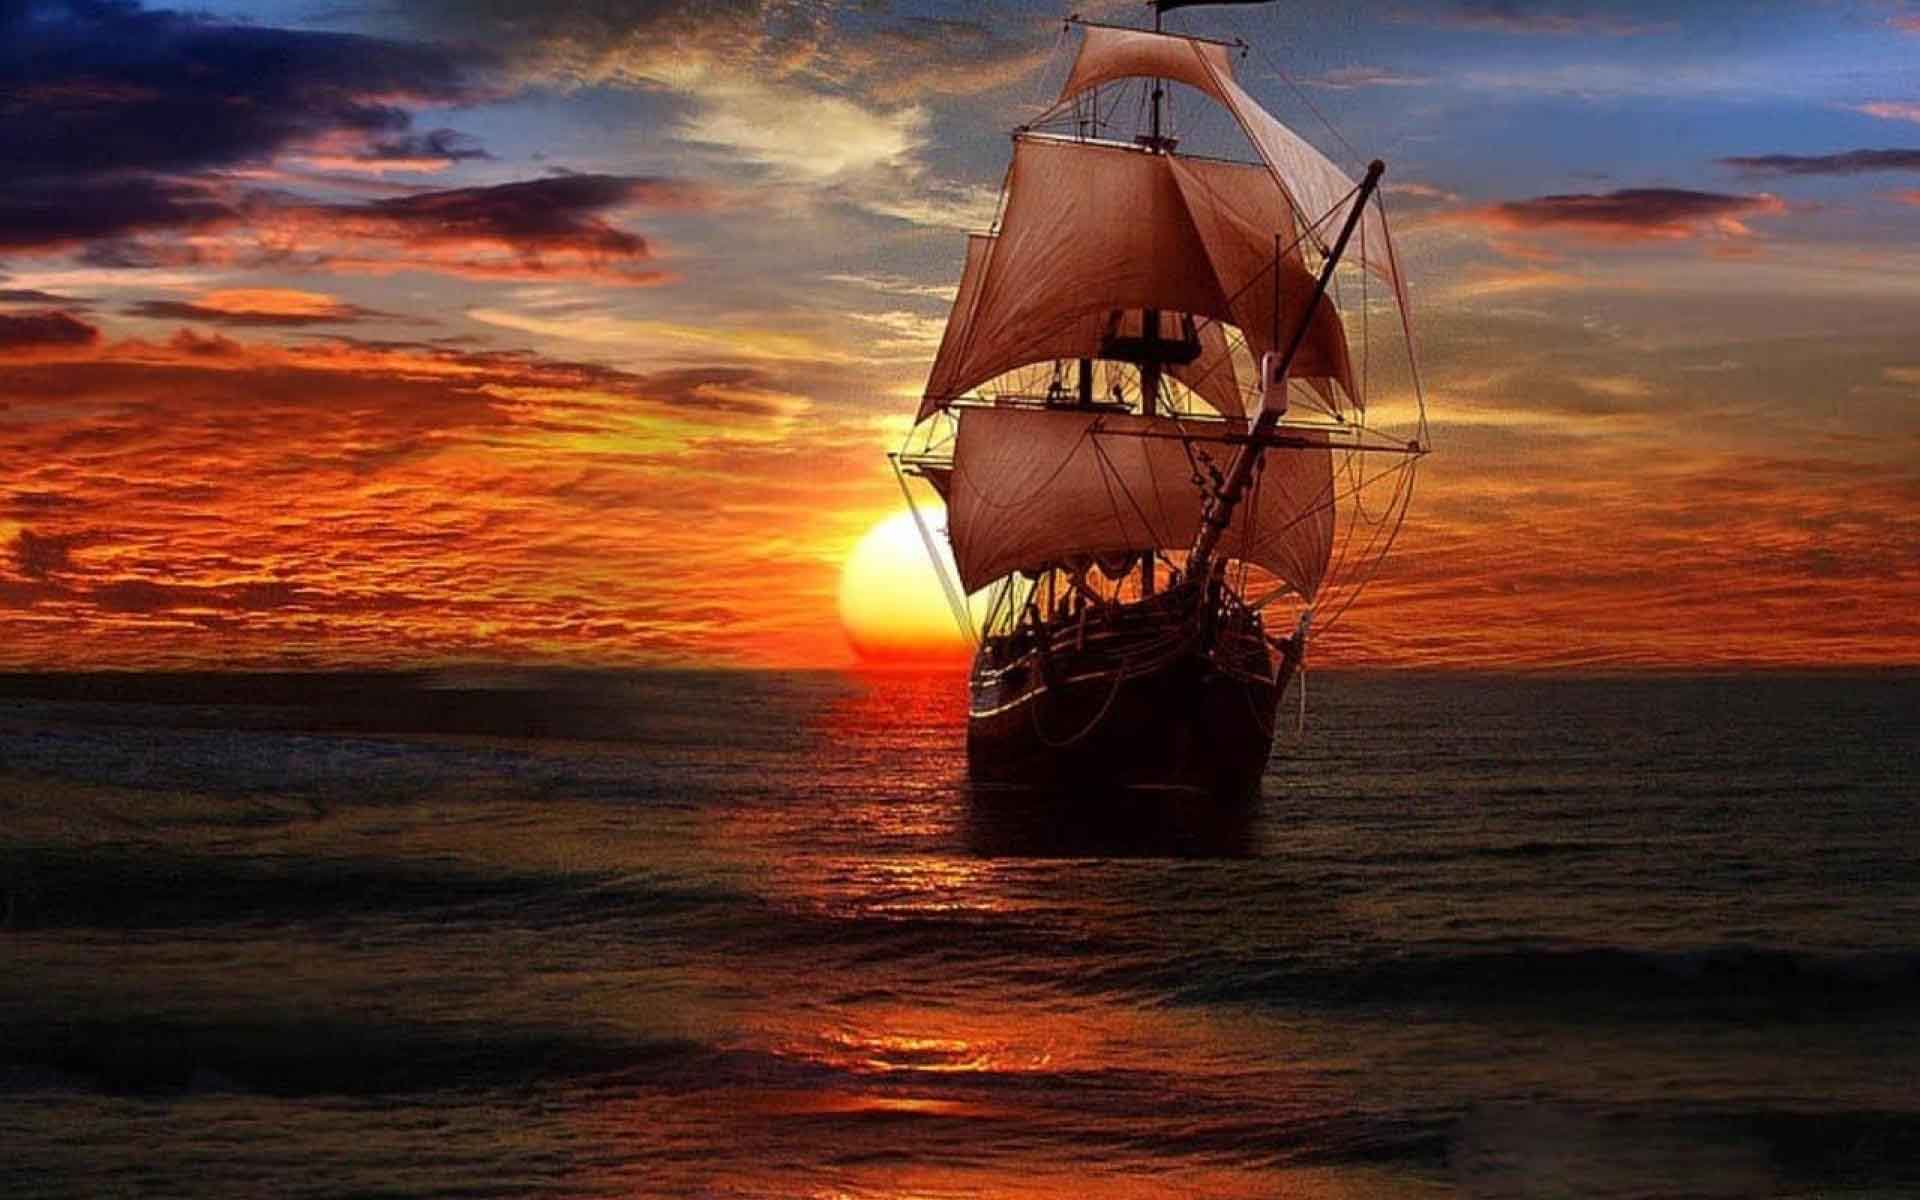 Pirate Ship Latest HD Wallpapers Free Download | New HD Wallpapers ...